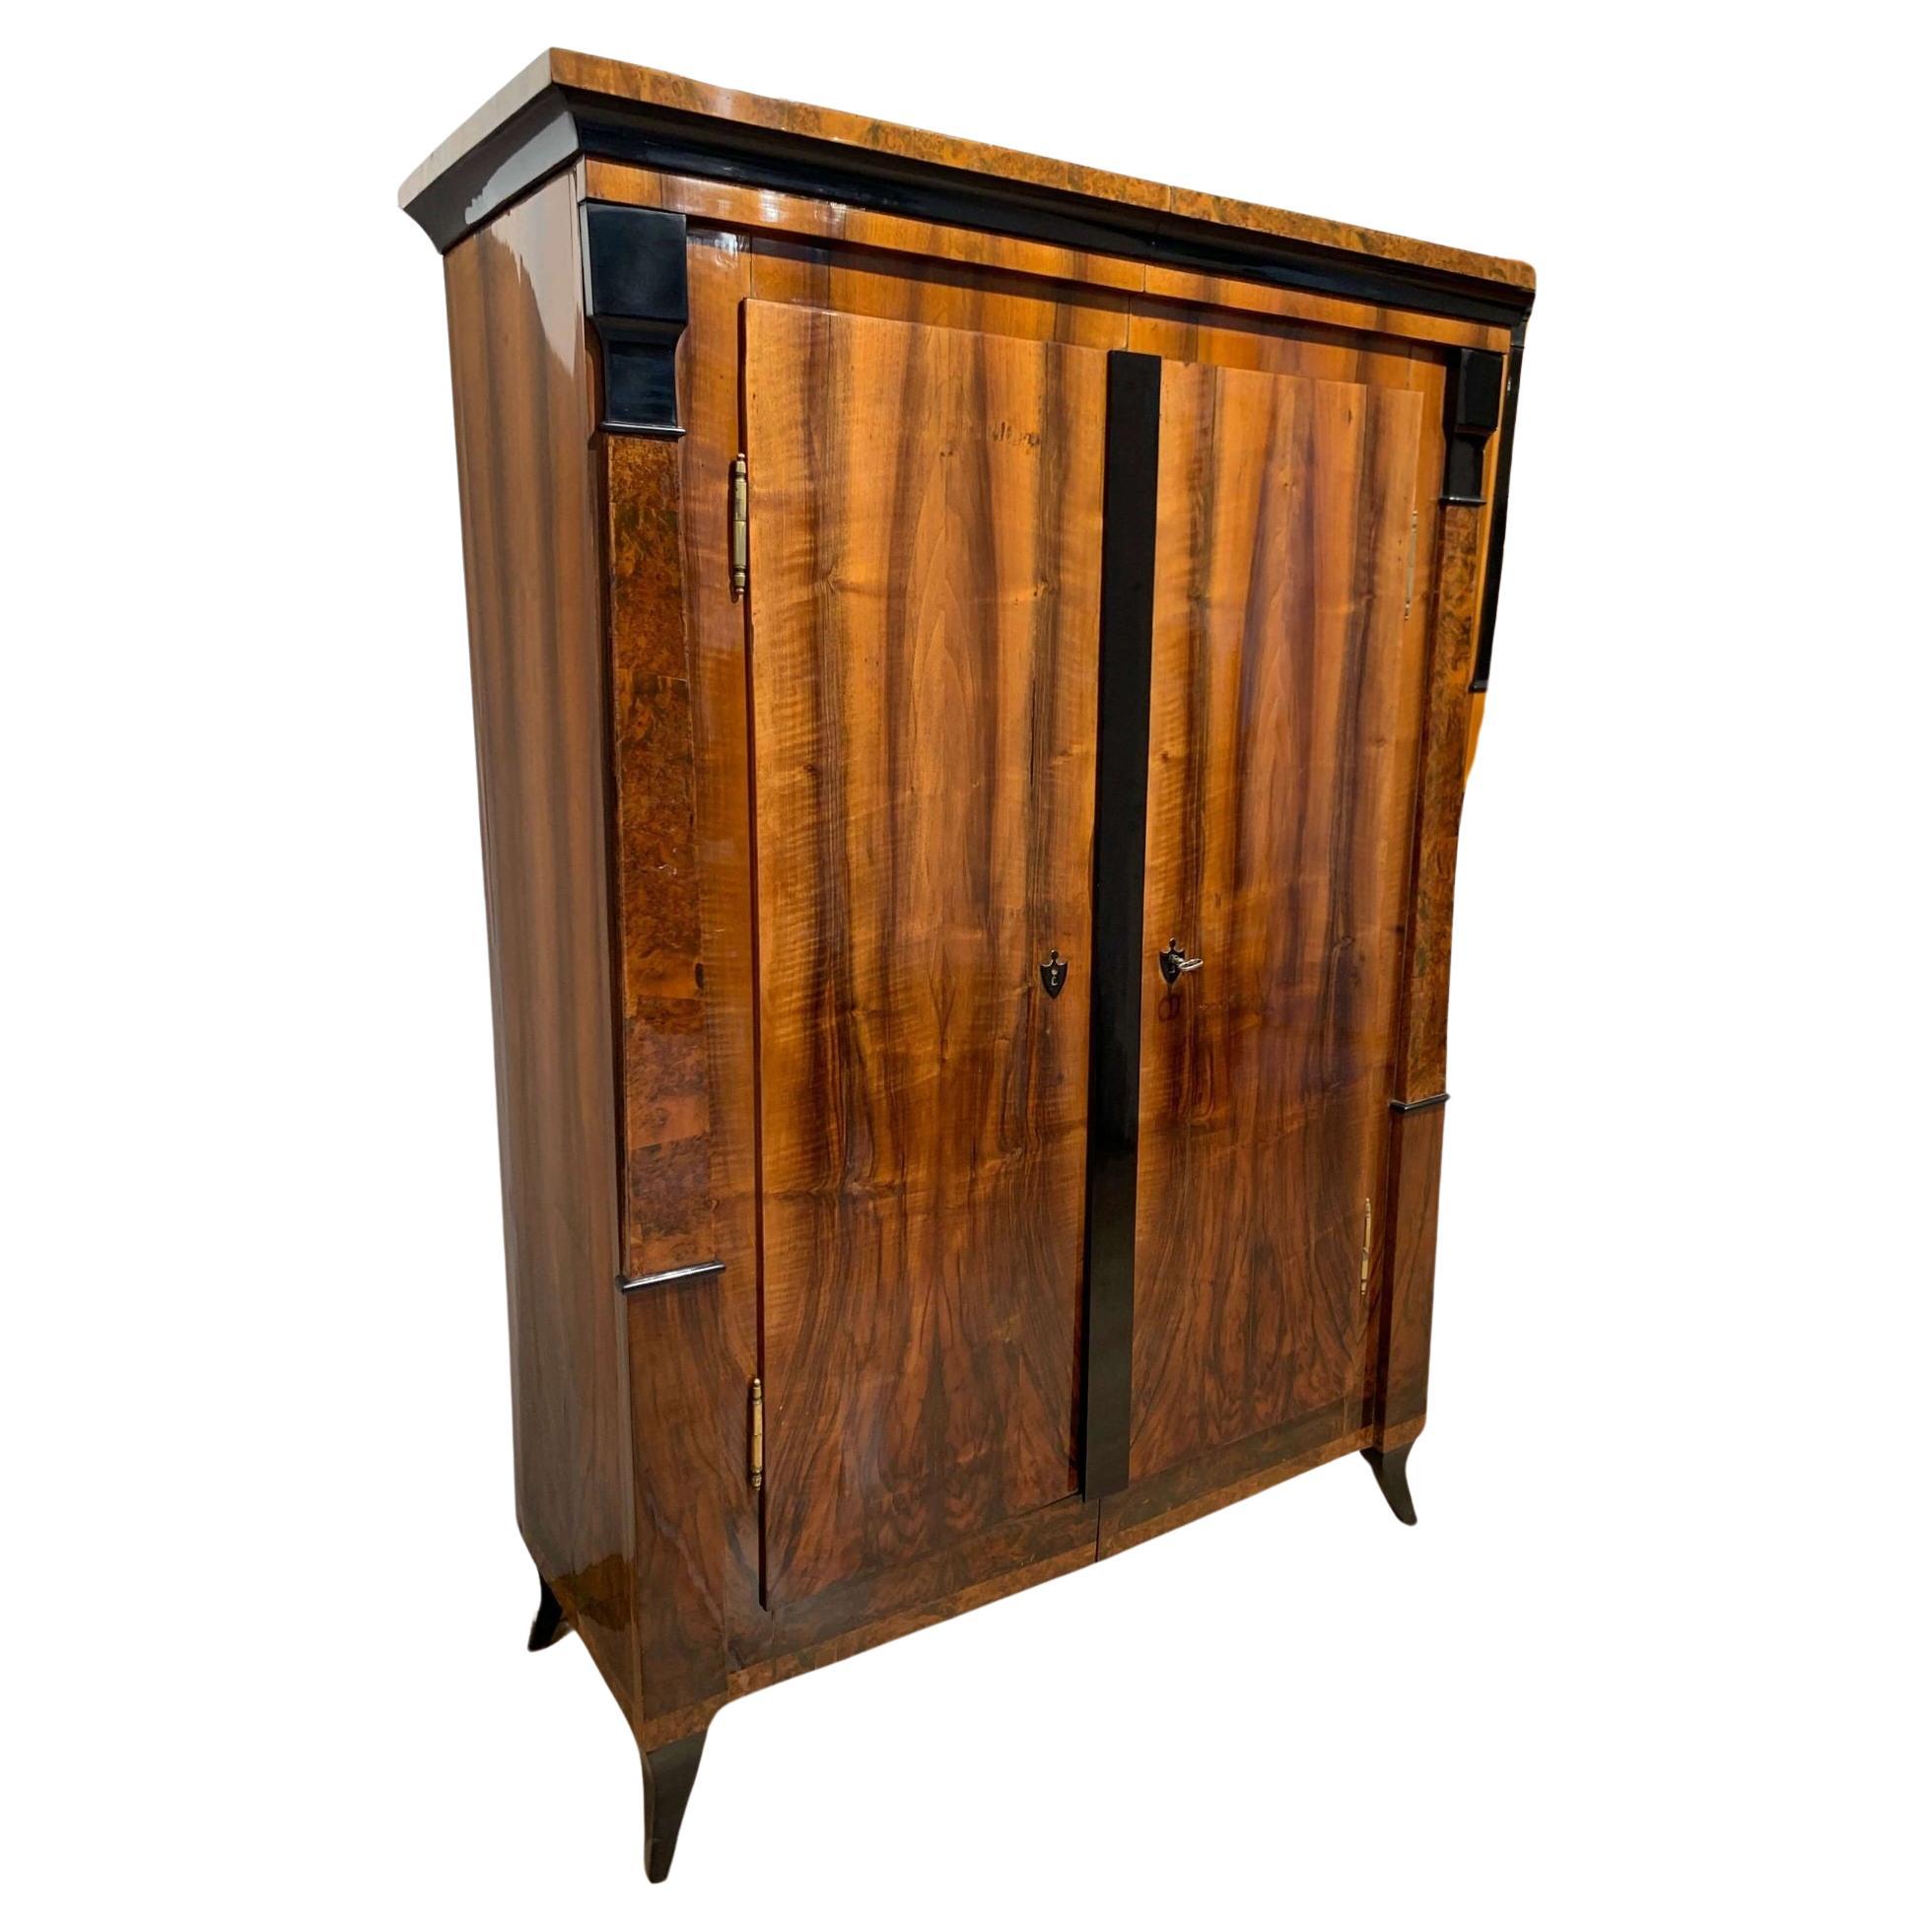 Very elegant two-doored neoclassical Biedermeier armoire from South Germany, circa 1820. Great, balanced design with a beautiful wood composition and ebonized pilaster columns.

The front, sides are veneered in a beautifully grained bookmatched